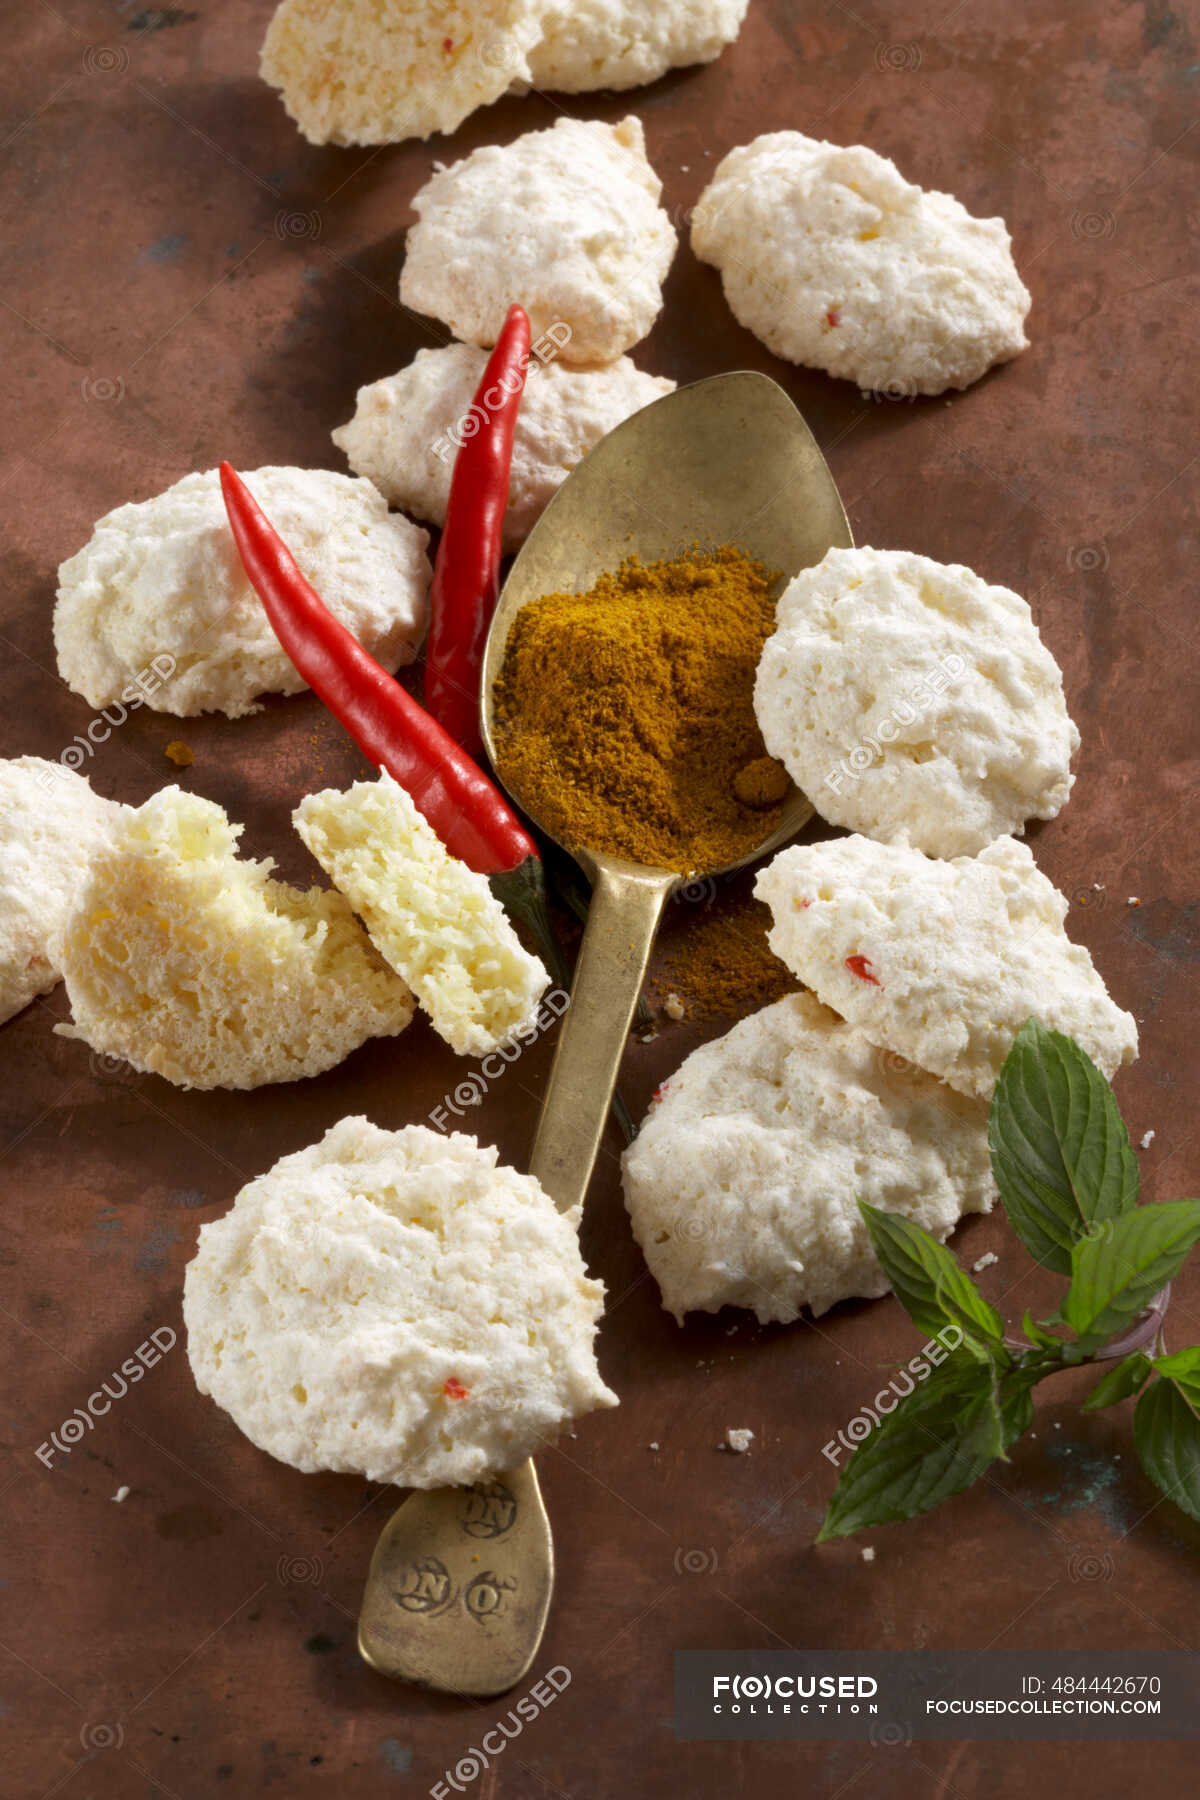 Curry macarons and curry powder — taste, culture - Stock Photo | #484442670